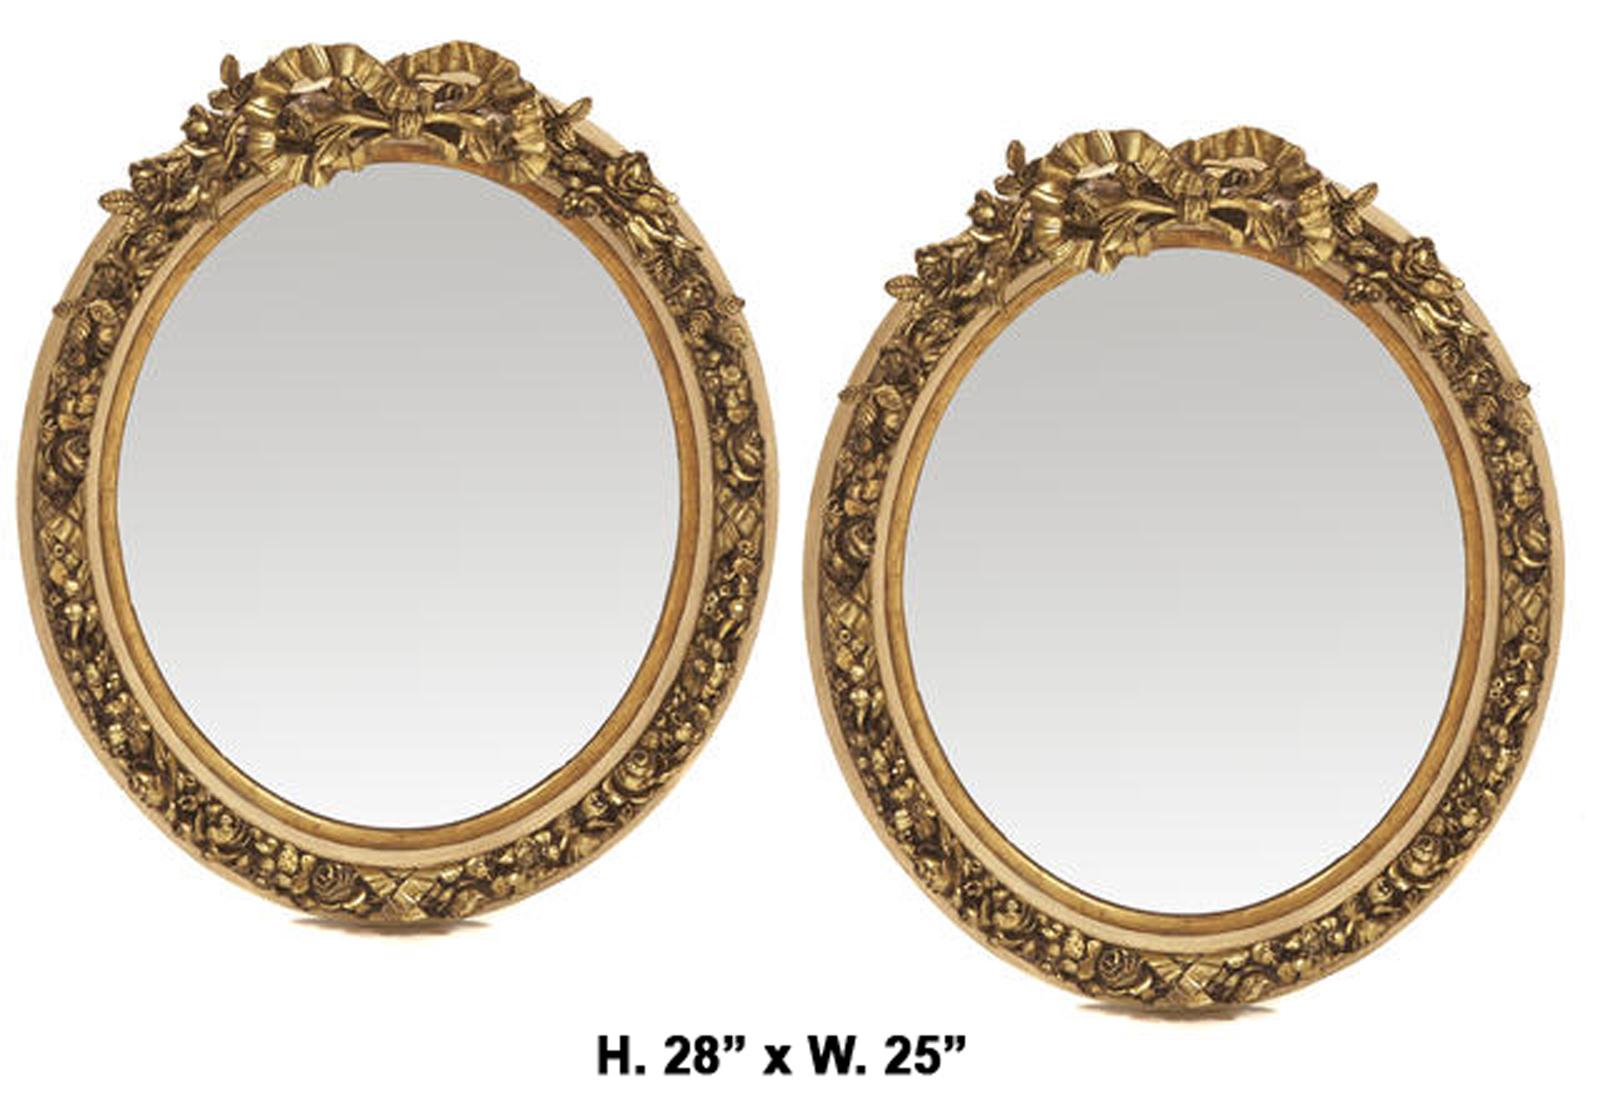 Pair of French Louis XV style gilt oval mirrors.
Mid-20th century. 

The mirrors are surmounted with a carved gilt ribbon, each decorated in a fruiting, floral and foliate motif throughout, the festooned frame surrounding an oval mirror plate.